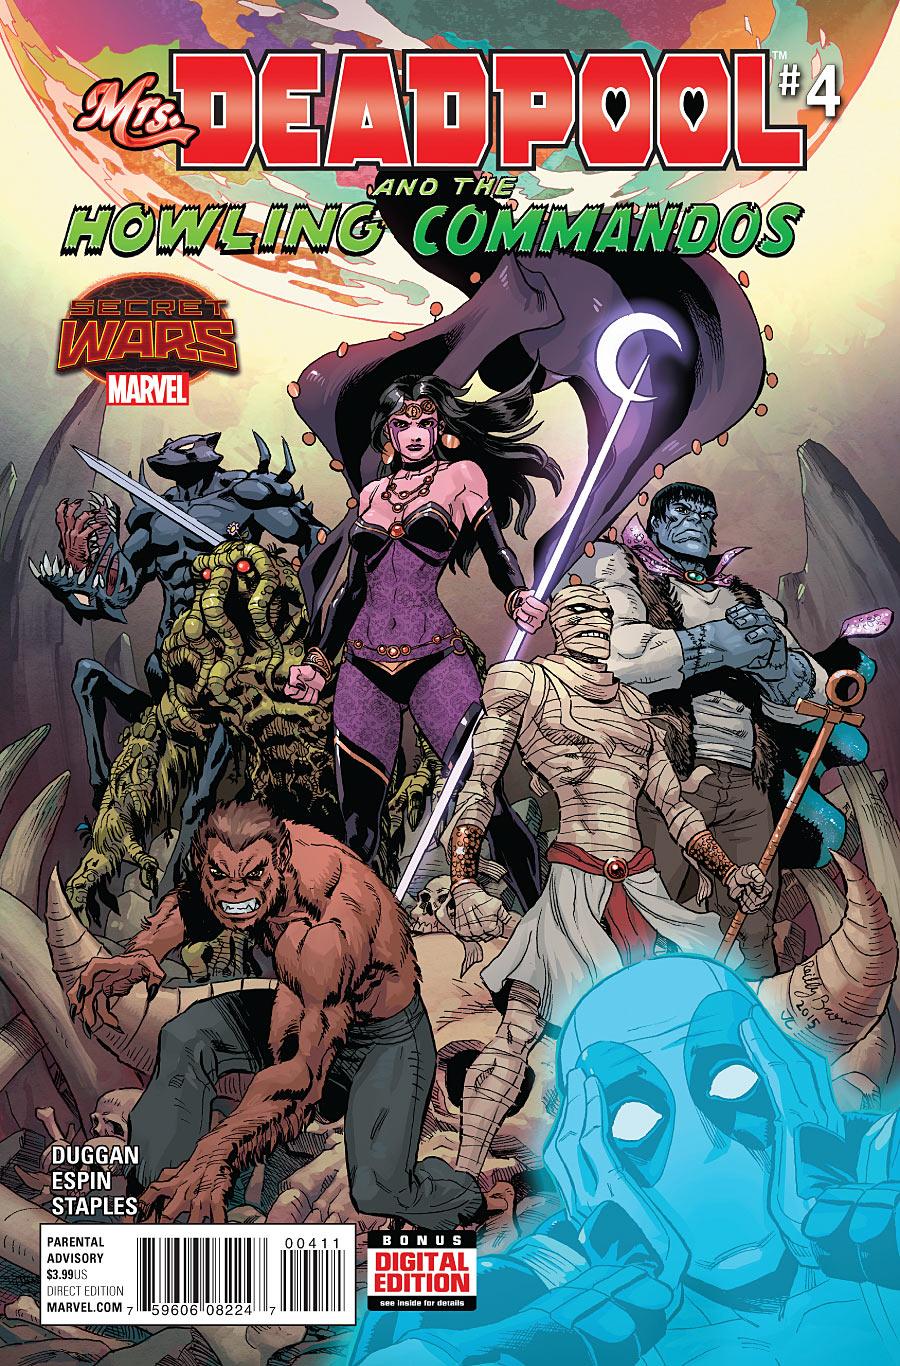 Mrs. Deadpool and the Howling Commandos Vol. 1 #4